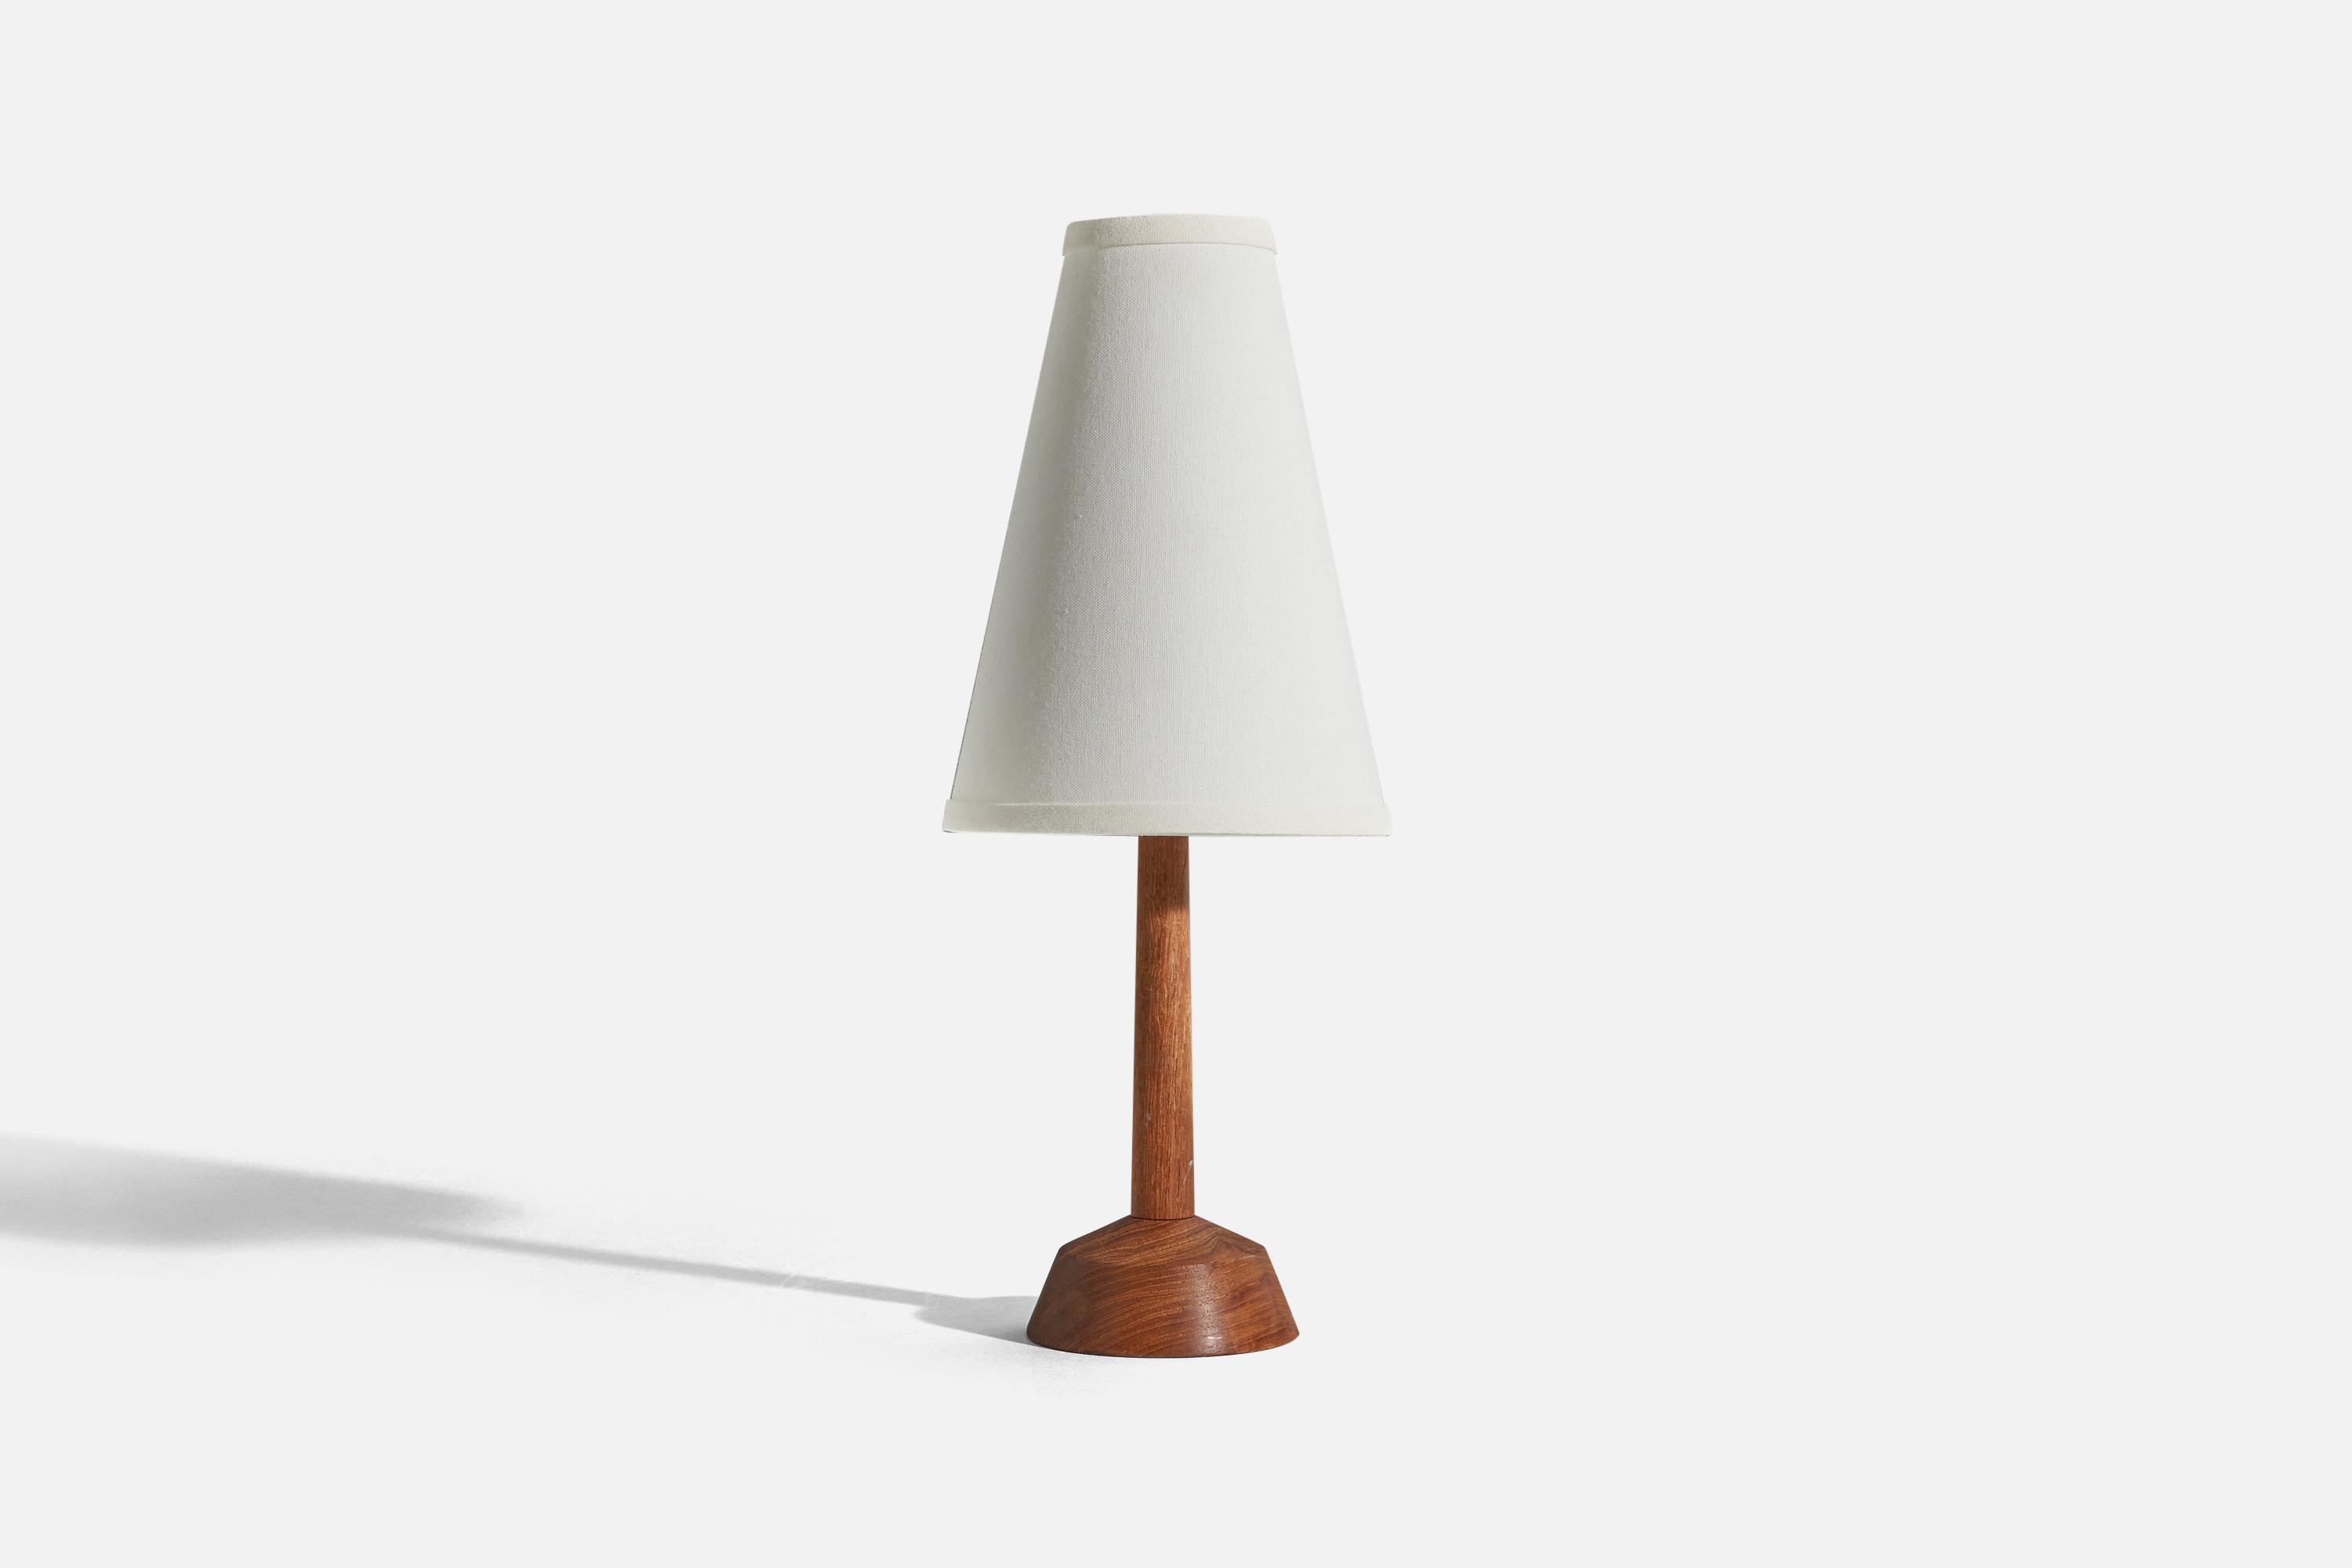 A teak table lamp designed and produced in Sweden, c. 1950s. 

Sold without lampshade. 
Dimensions of Lamp (inches) : 11.93 x 4.5 x 4.5 (H x W x D)
Dimensions of Shade (inches) : 3.25 x 7.25 x 10 (T x B x S)
Dimension of Lamp with Shade